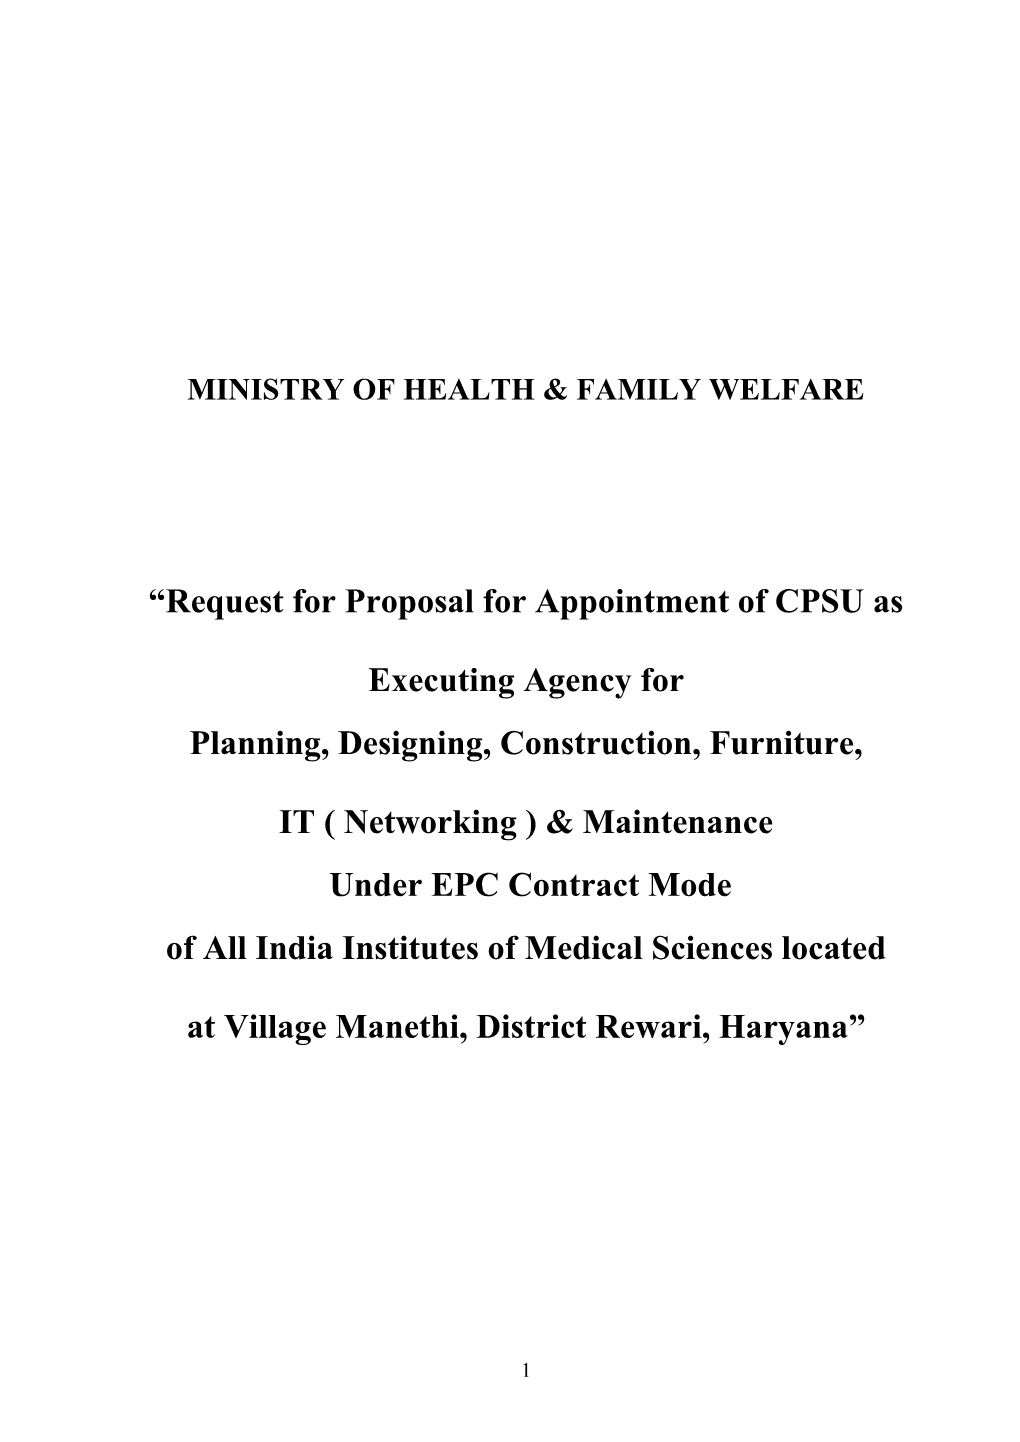 Request for Proposal for Appointment of CPSU As Executing Agency for Planning, Designing, Construction, Furniture, IT ( Ne